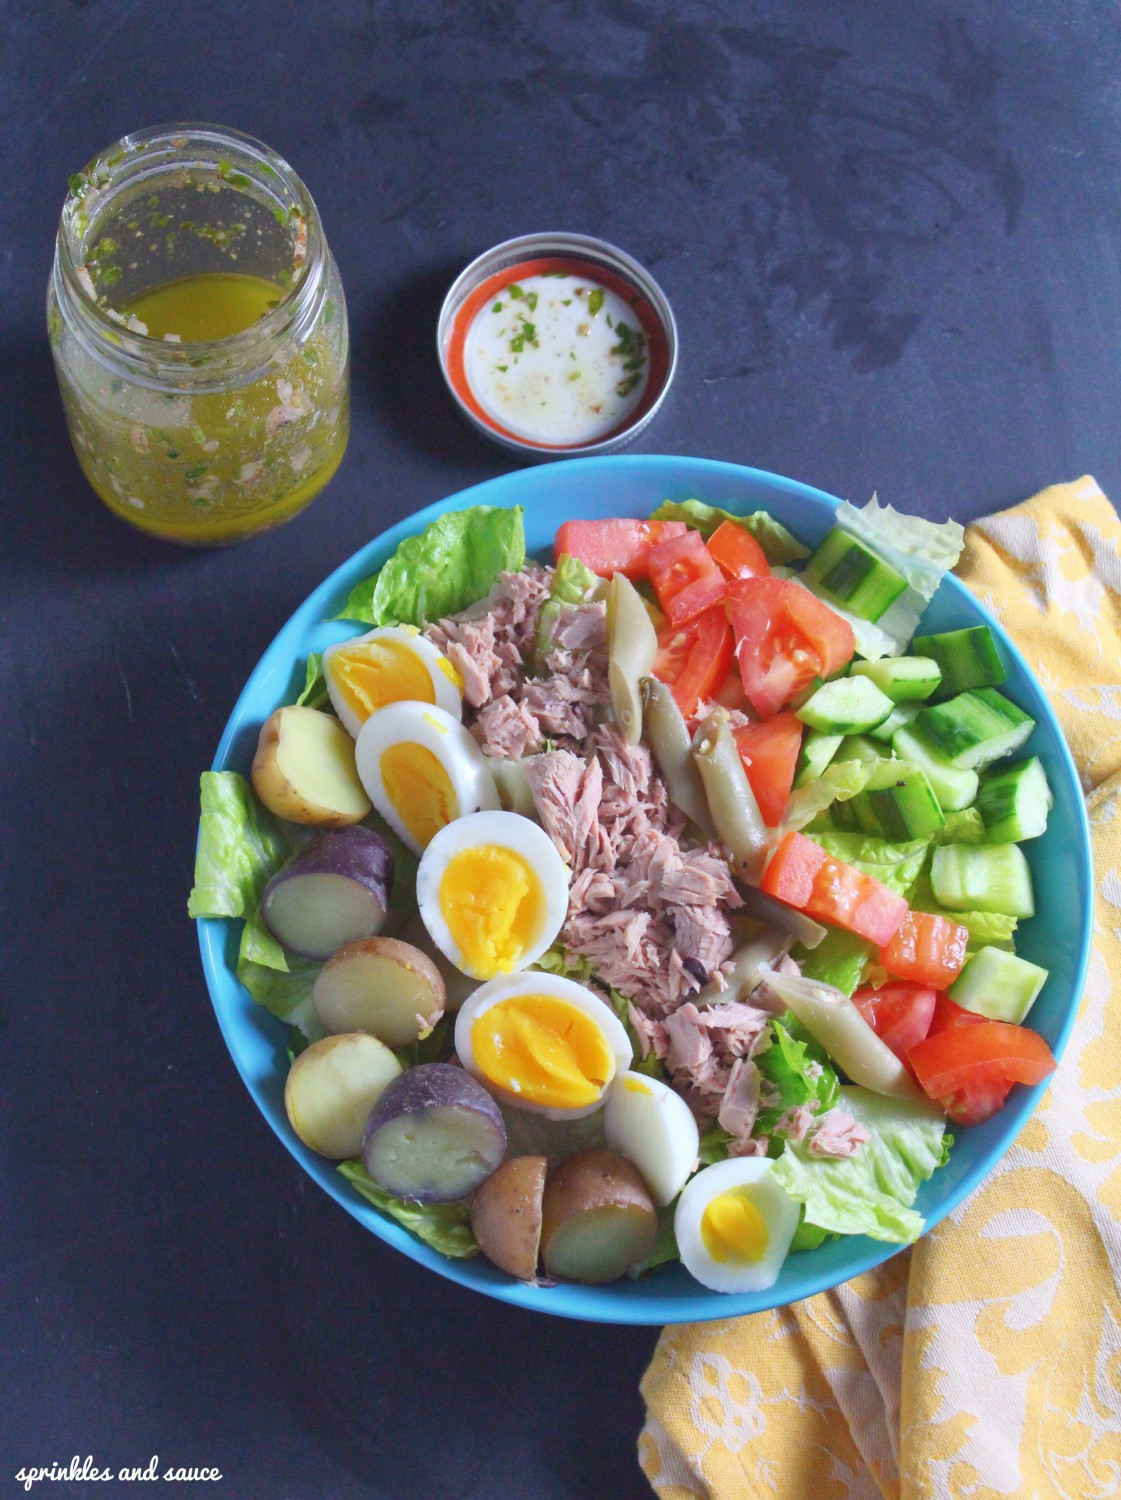 Tuna and Egg Salad with French Vinaigrette Dressing - sprinkles and sauce